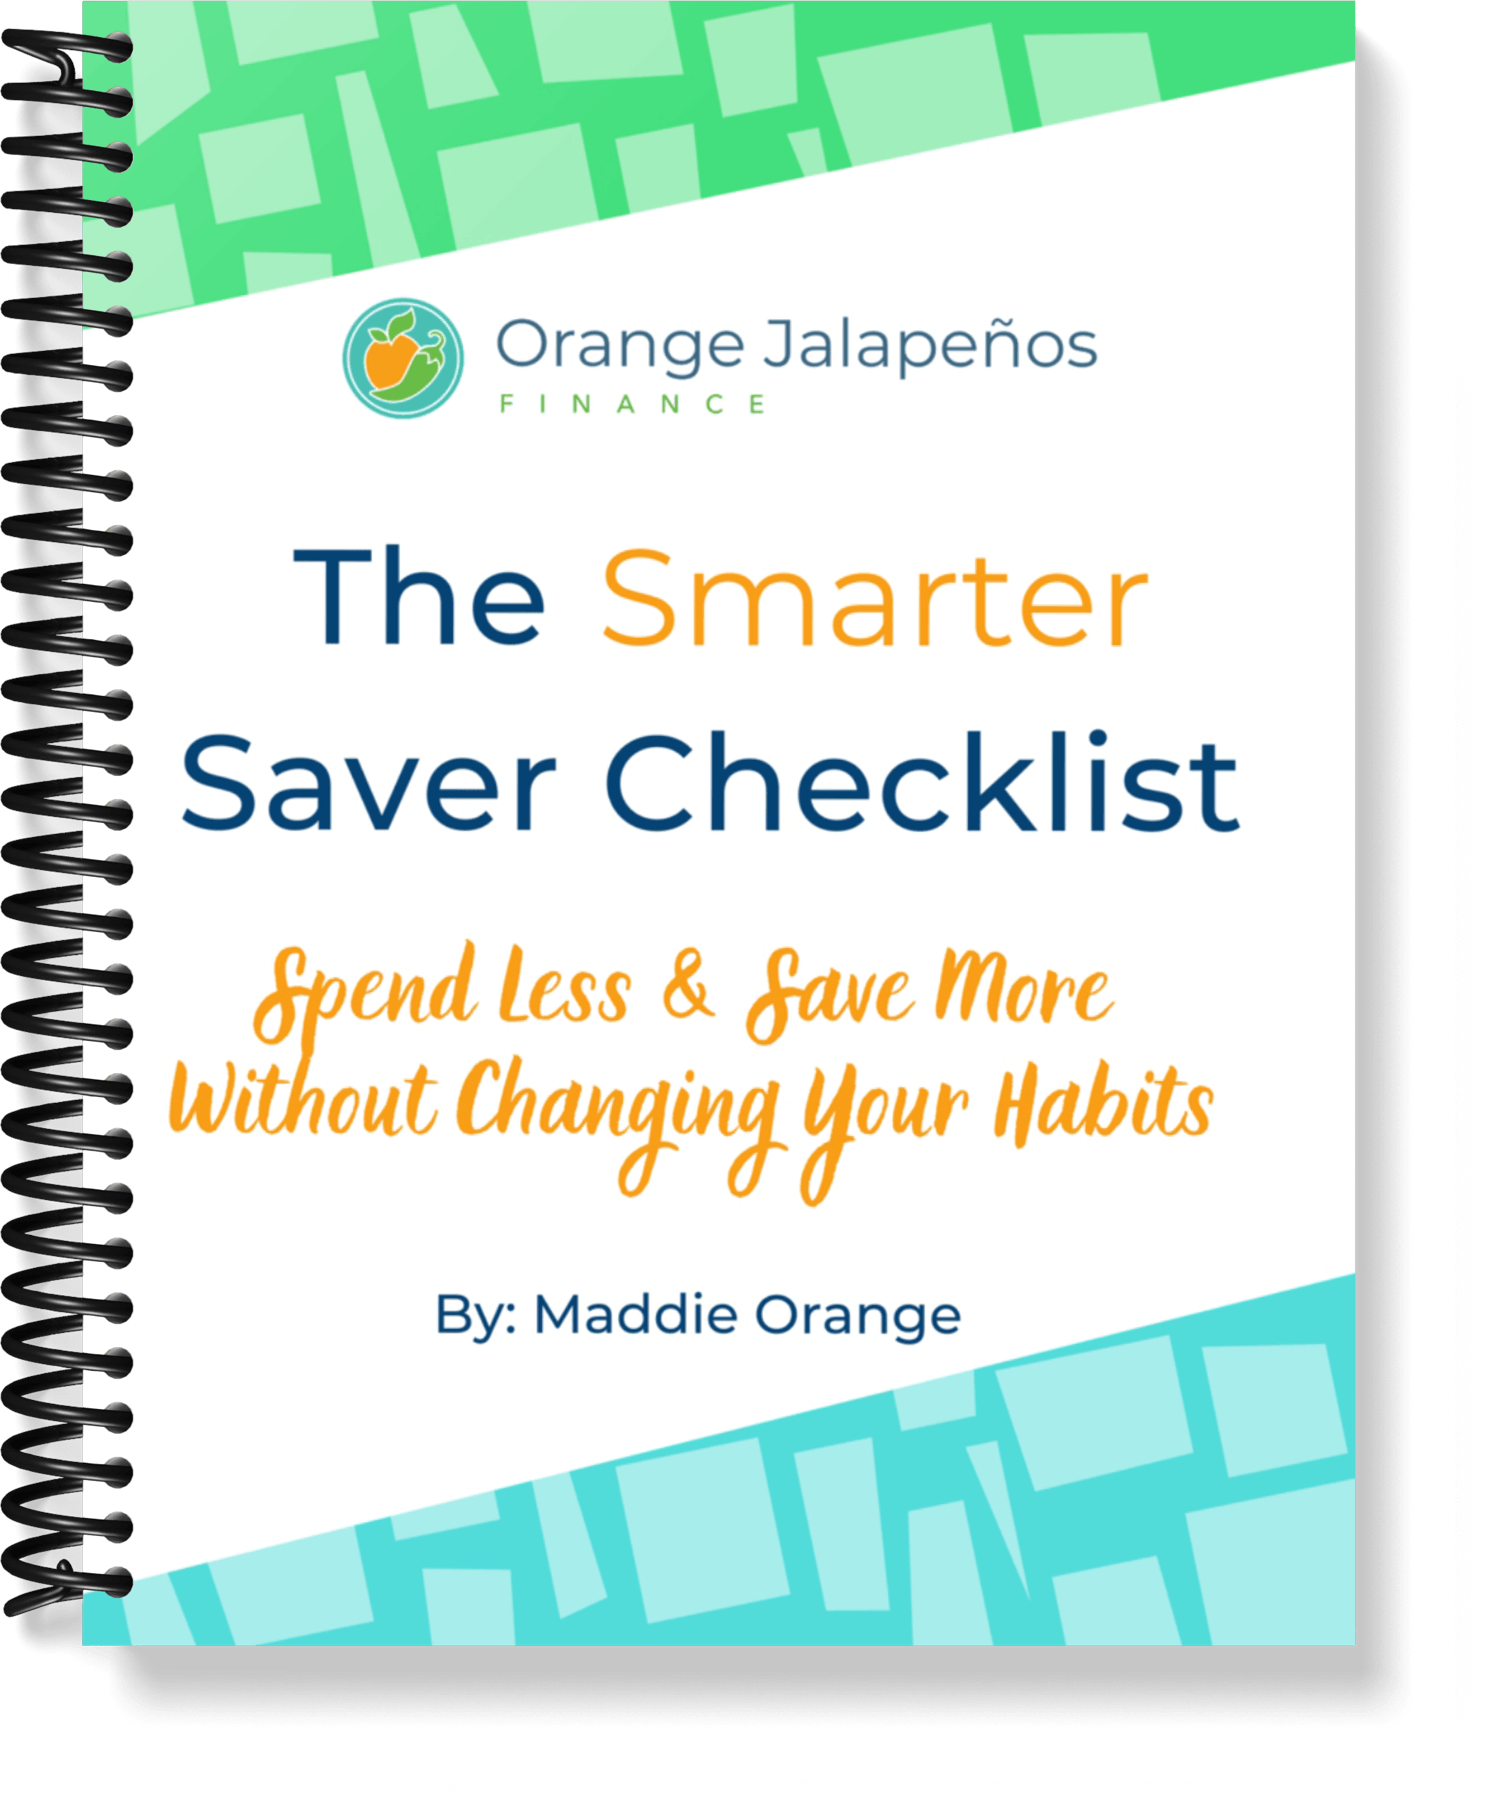 Image of notebook with title "The Smarter Saver Checklist: Spend Less And Save More Without Changing Your Habits"